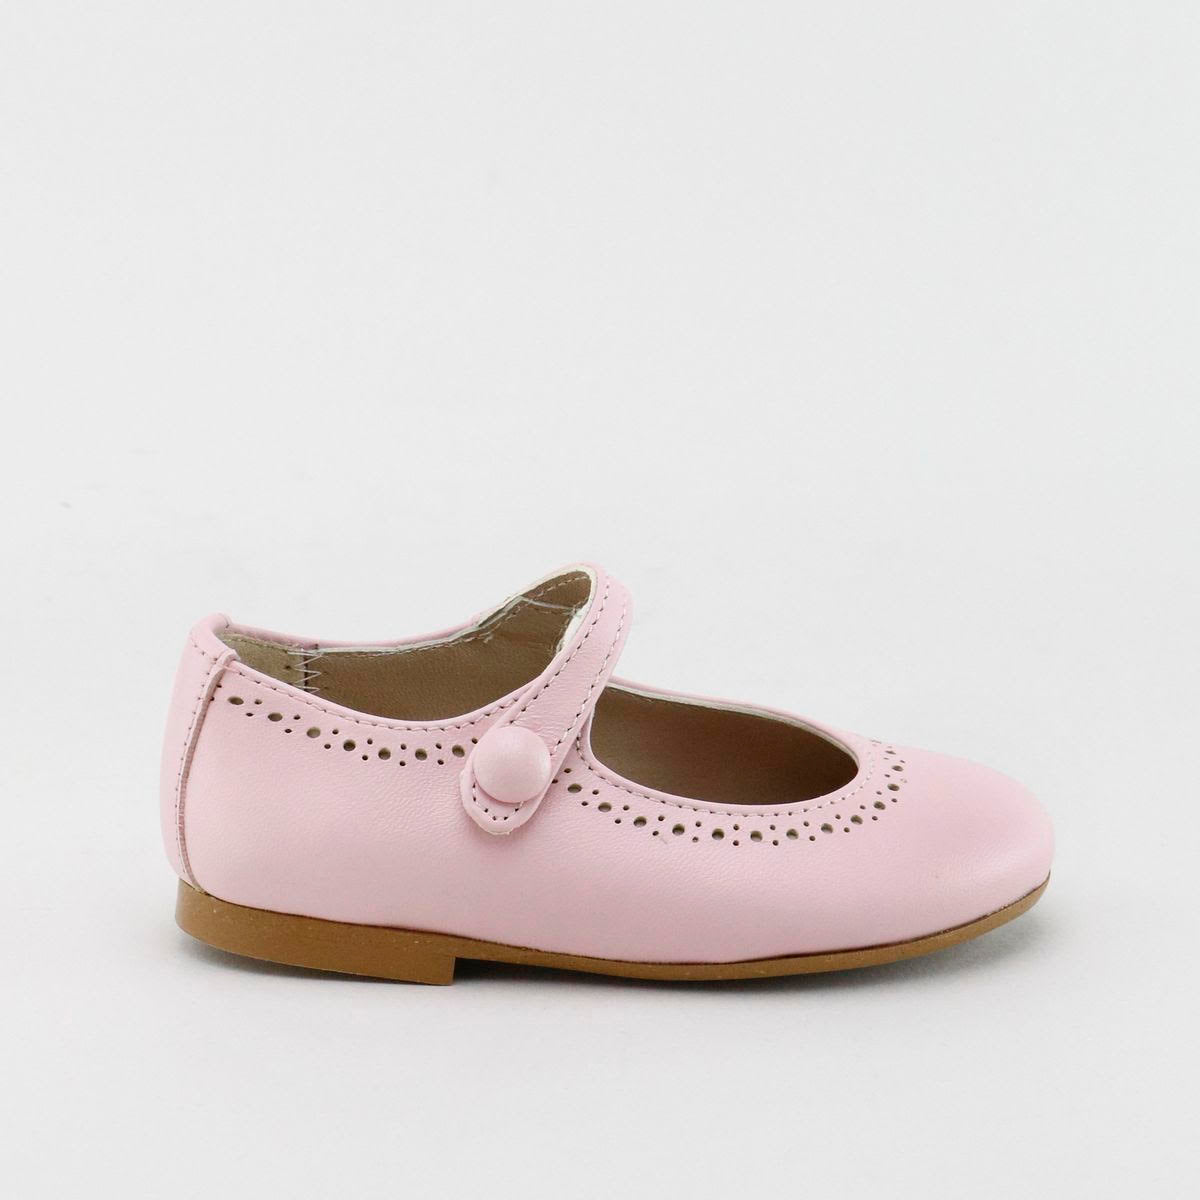 PAPANATAS PINK LEATHER DOTTED DESIGN ROUNDED MARY JANE